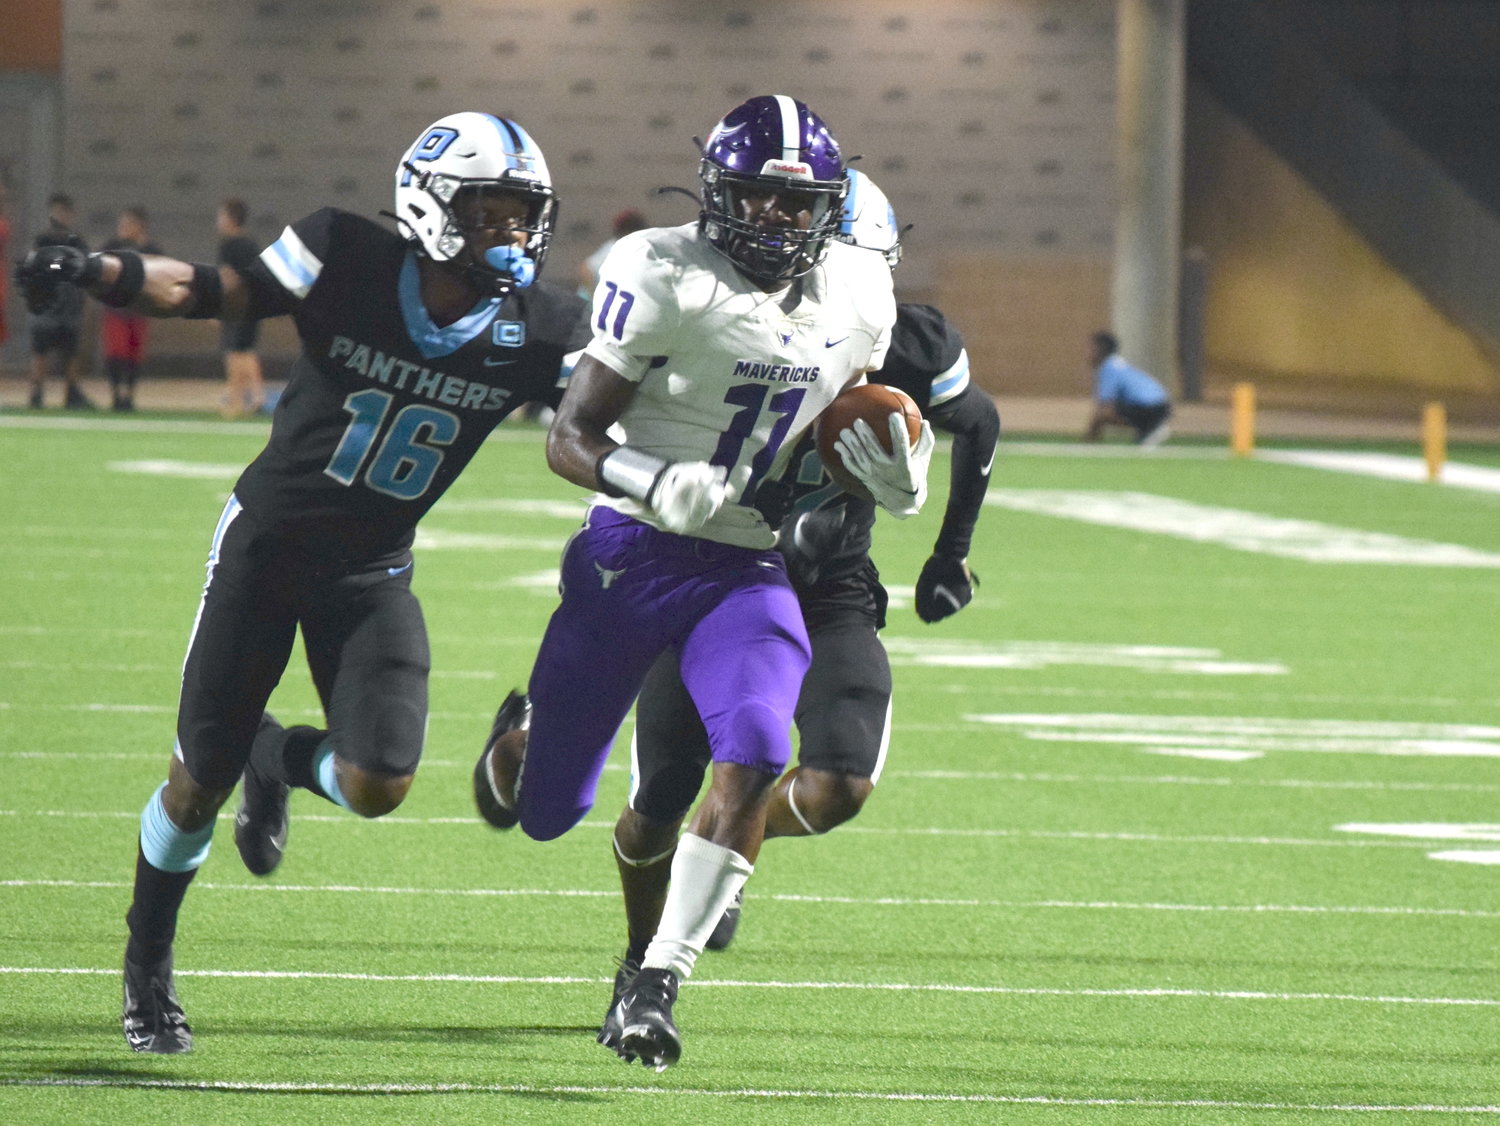 Morton Ranch’s Josiah Mills tries to break away from the Paetow defense during a game at Legacy Stadium on Sept. 3.